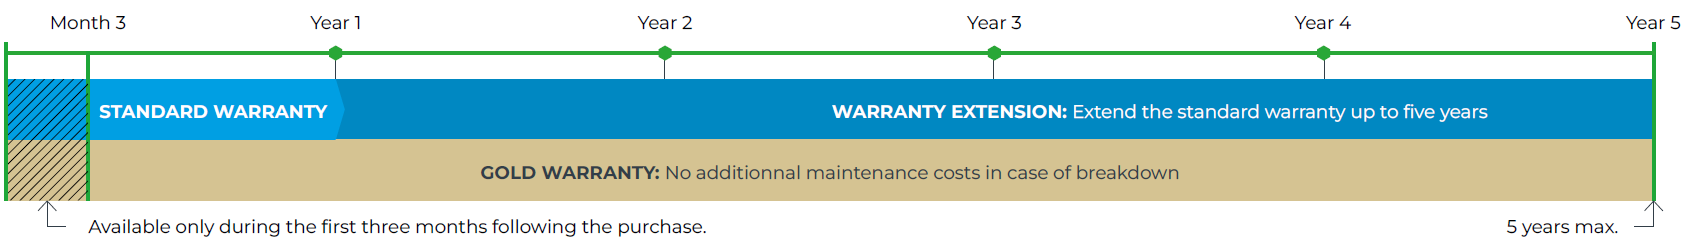 Warranty contracts services - Timeline